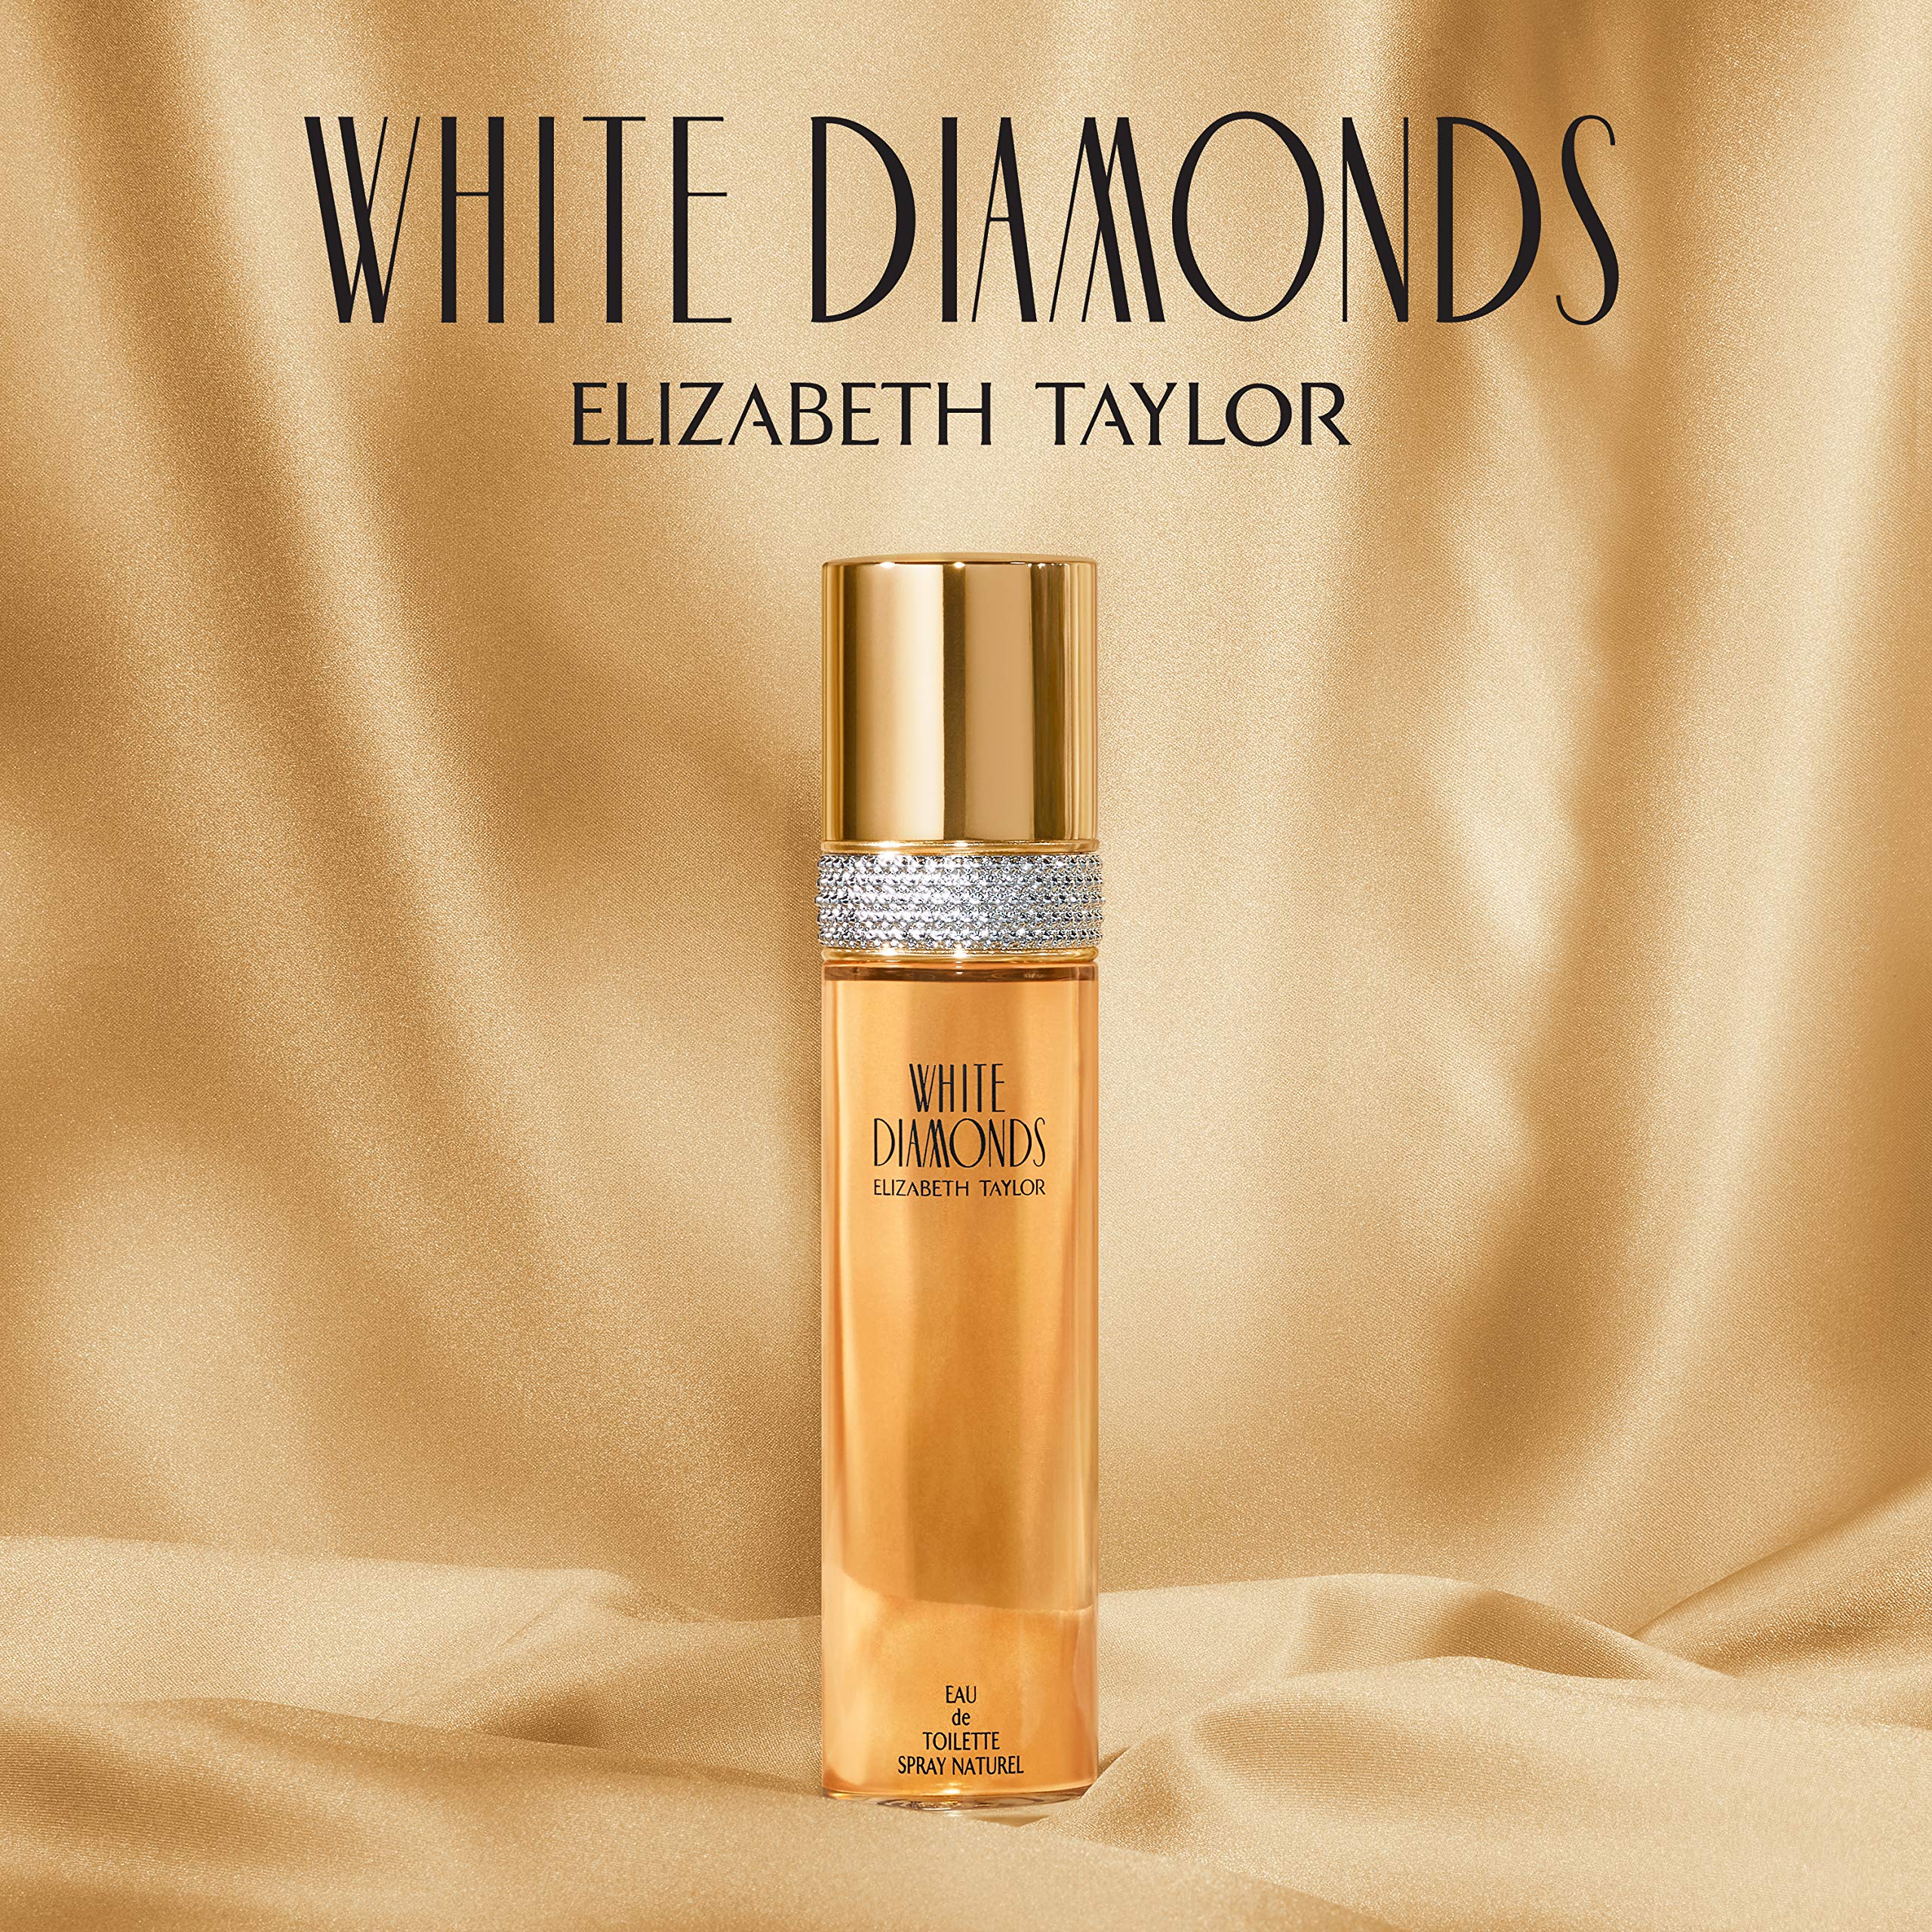 Johnny picard inspired by white diamond ELISABETH TAYLOR